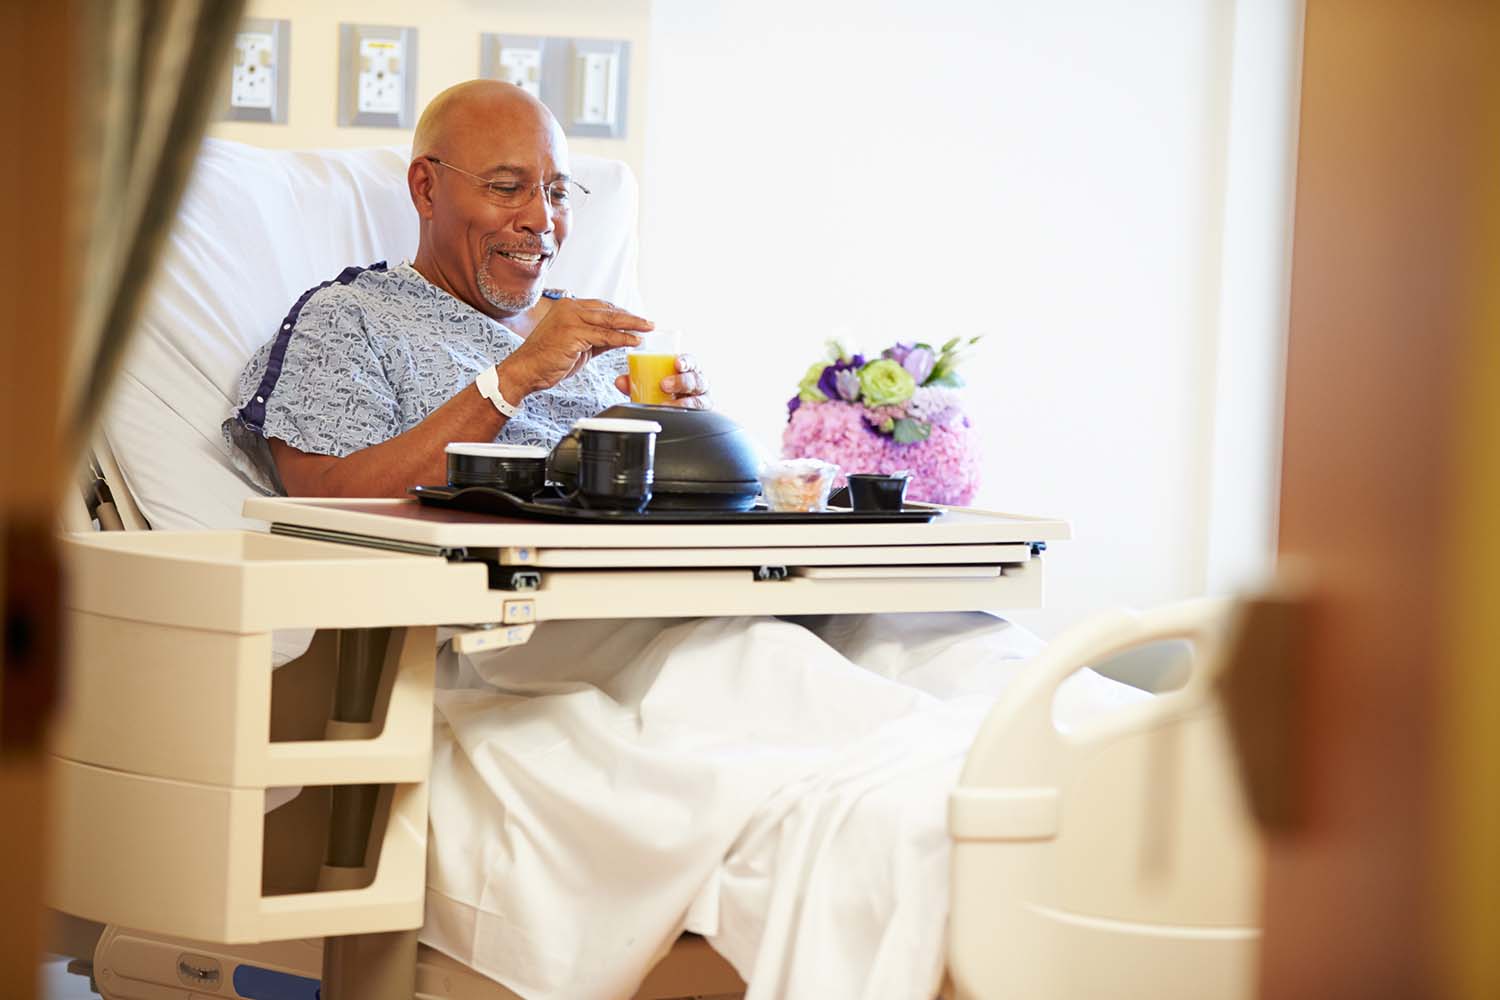 A male patient sits up in a hospital bed as he opens containers of food on a tray table